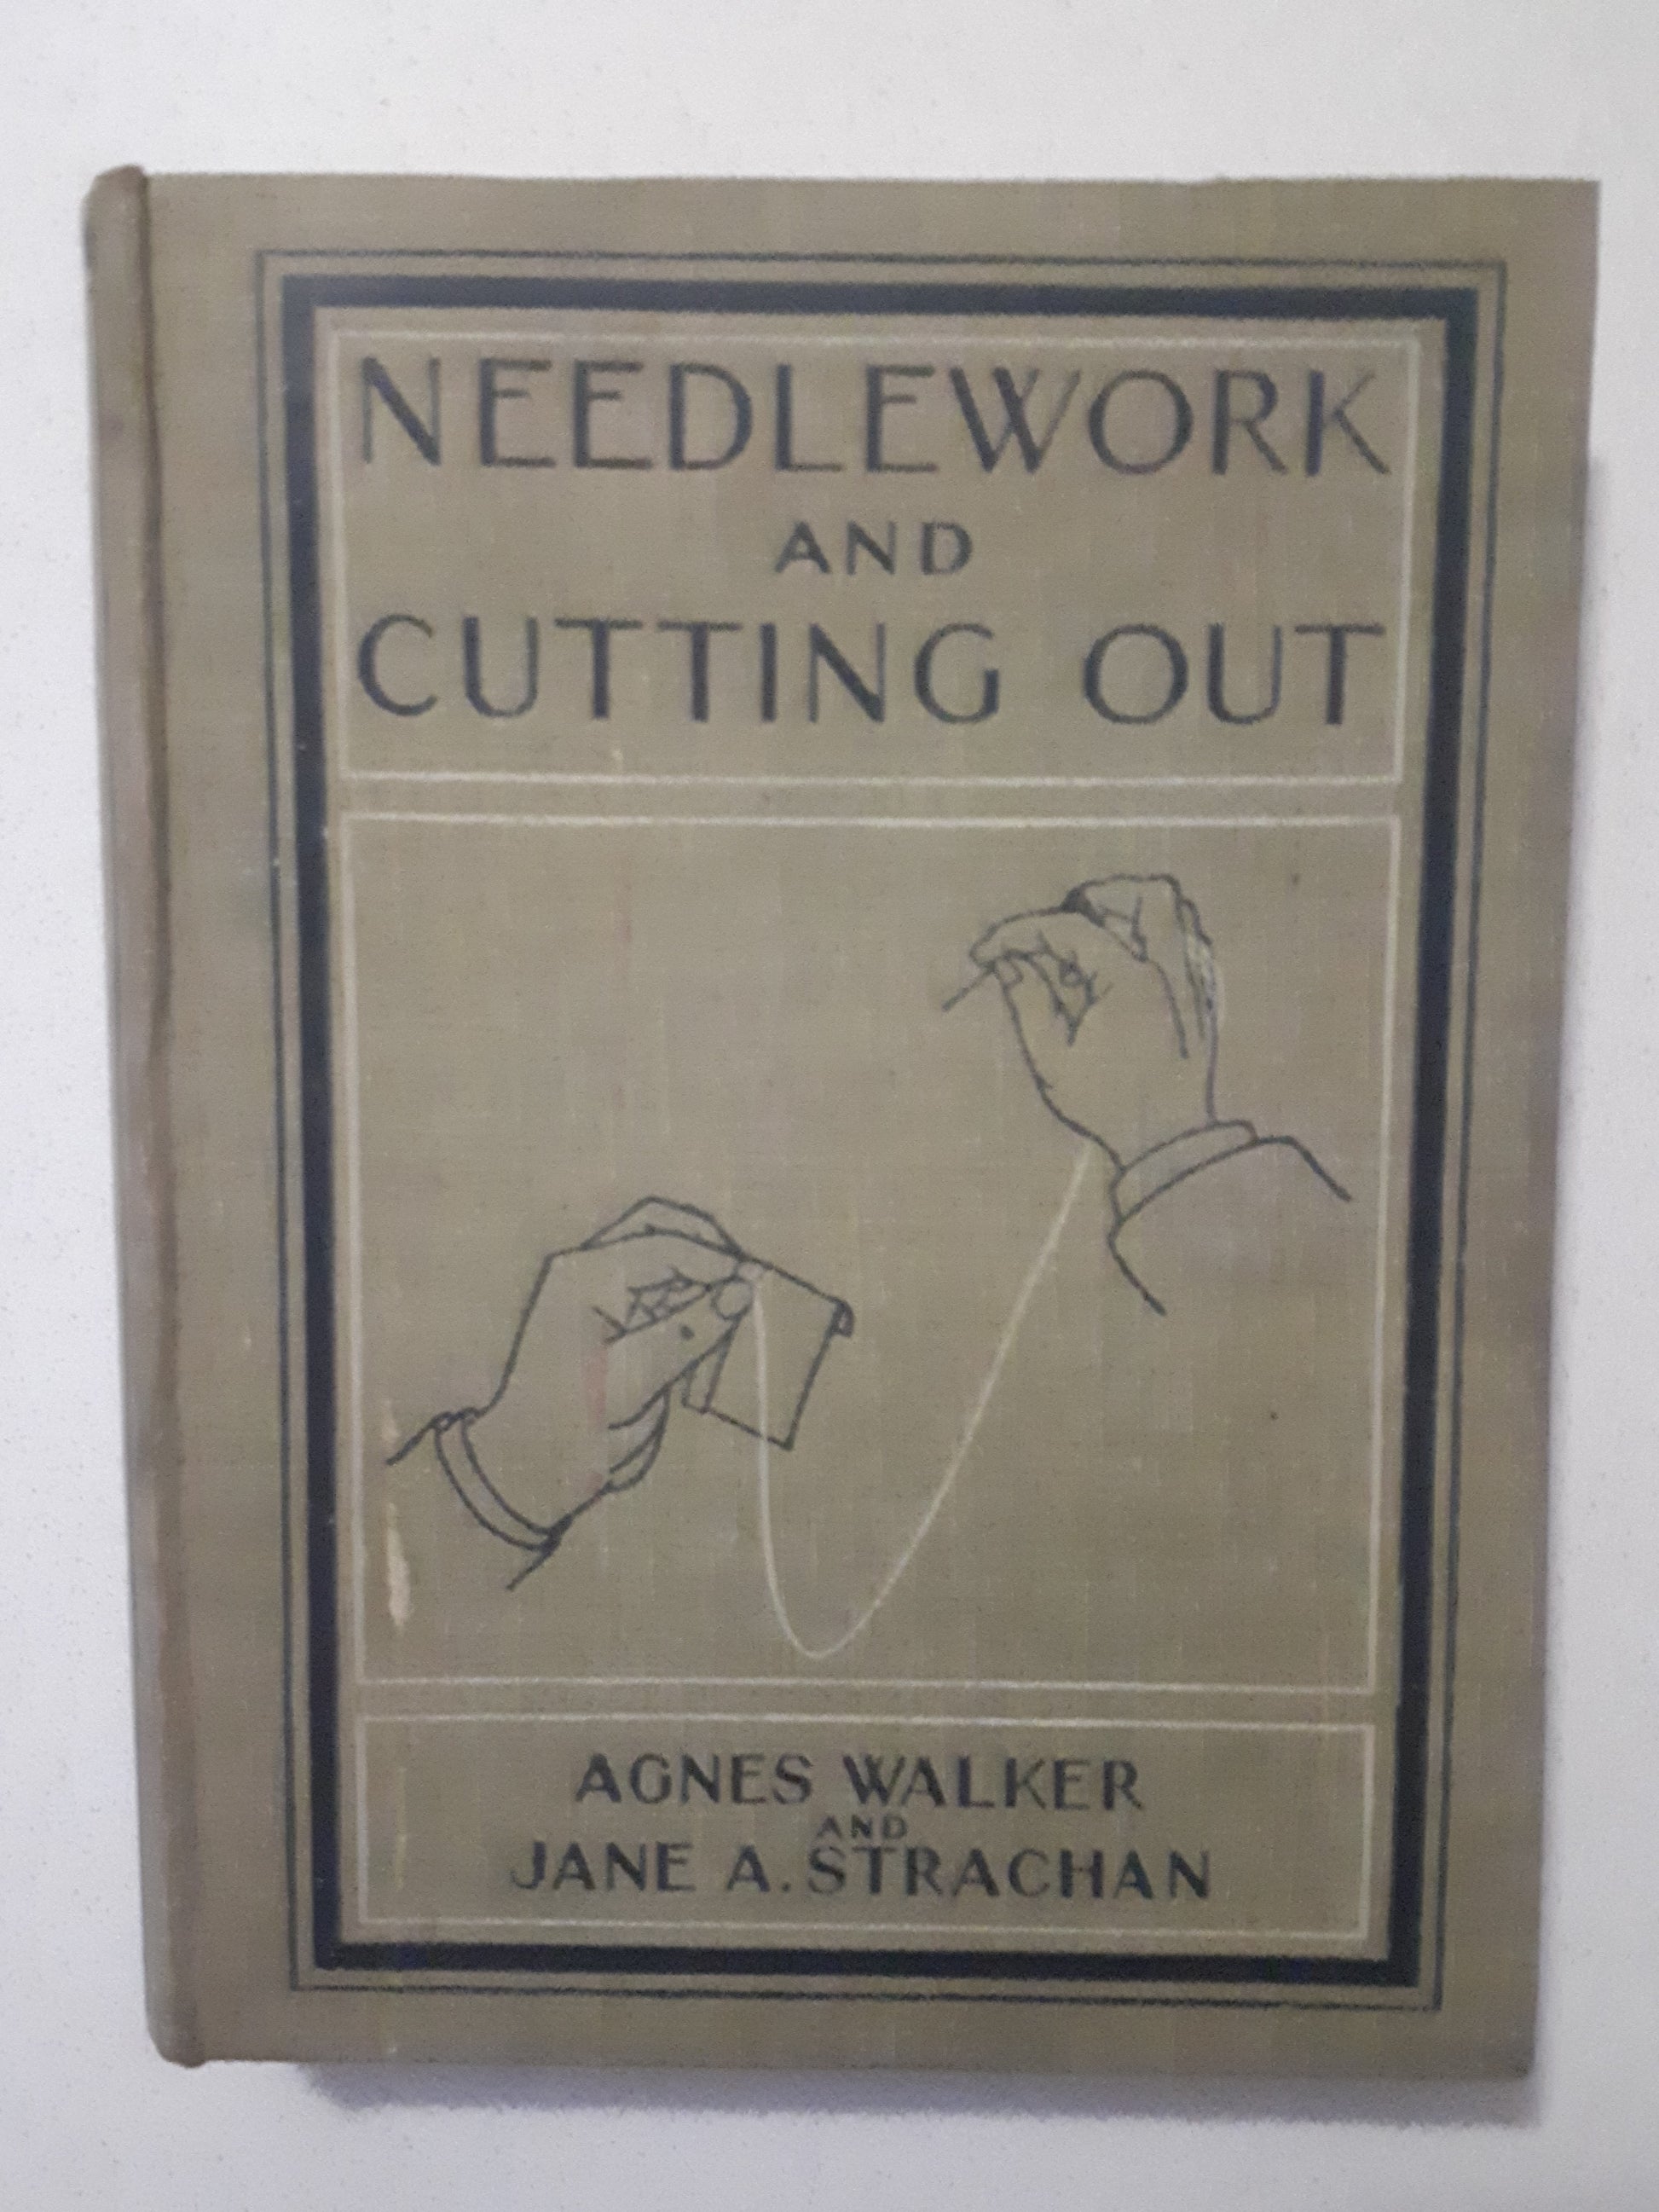 Needlework and Cutting Out by Agnes Walker